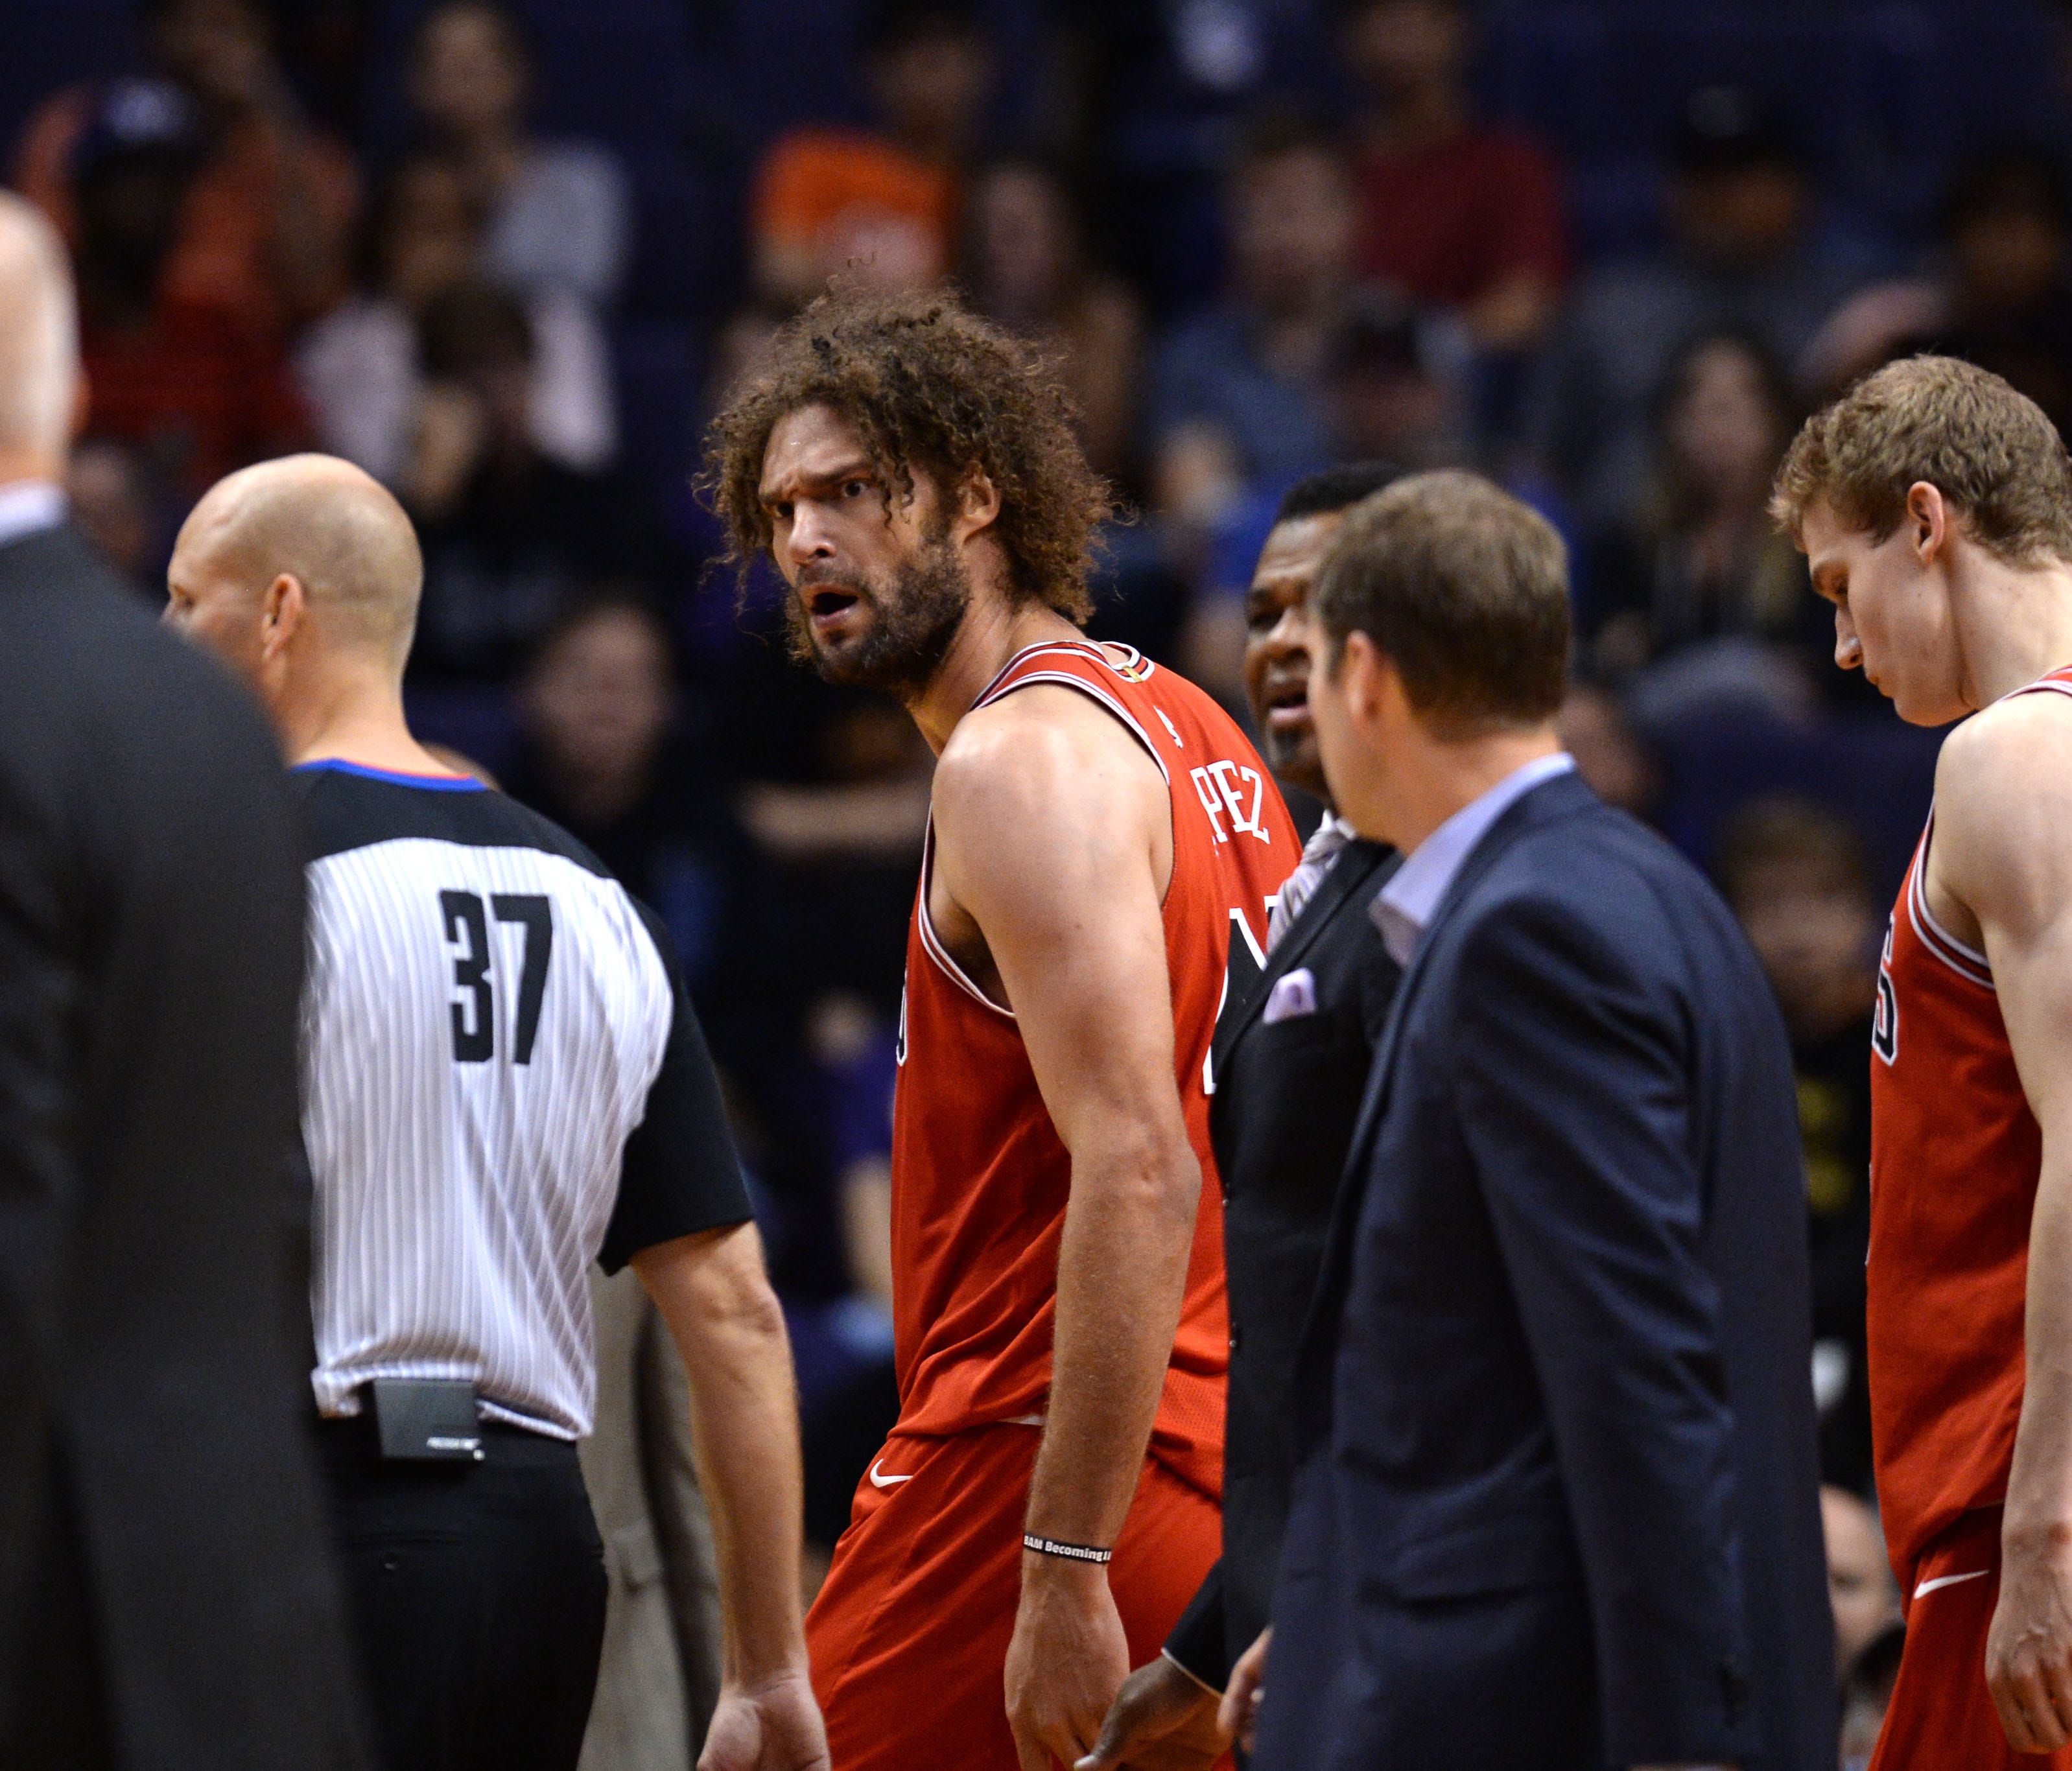 Chicago Bulls center Robin Lopez (42) shouts towards the Phoenix Suns bench after a scuffle during the second half at Talking Stick Resort Arena.